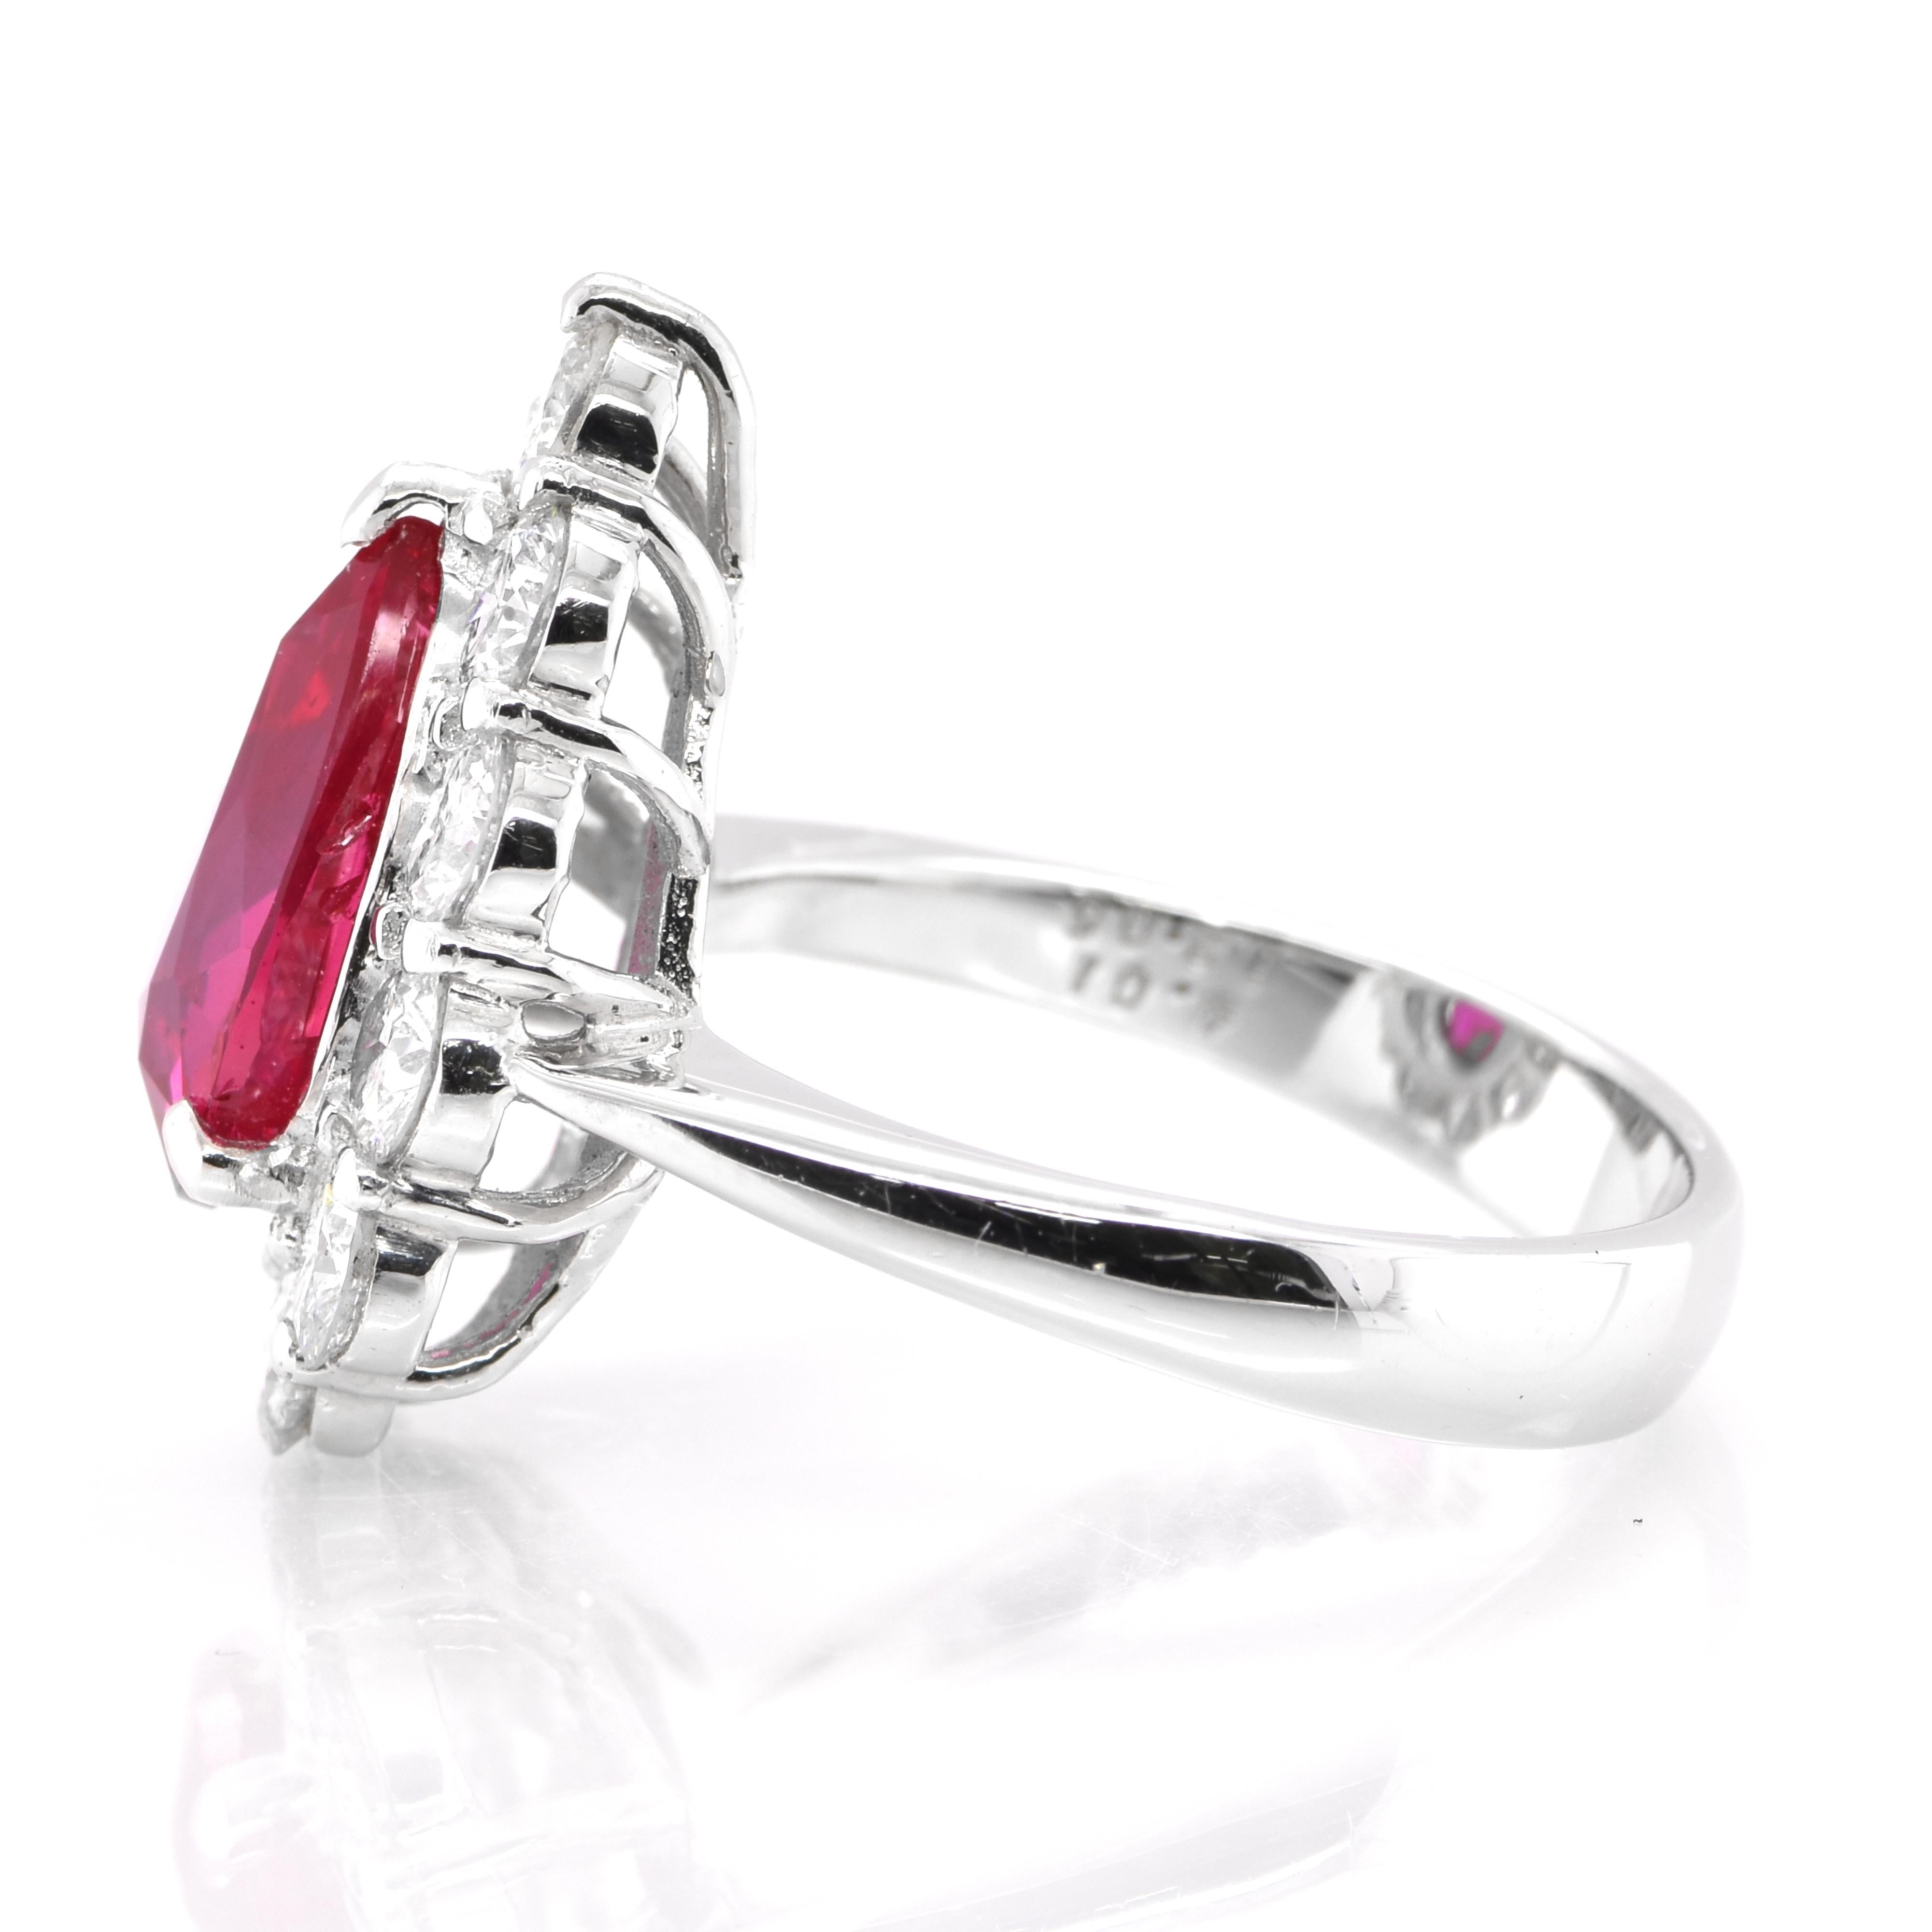 Pear Cut GIA Certified 4.01 Carat Natural Untreated 'No Heat' Ruby Ring Set in Platinum